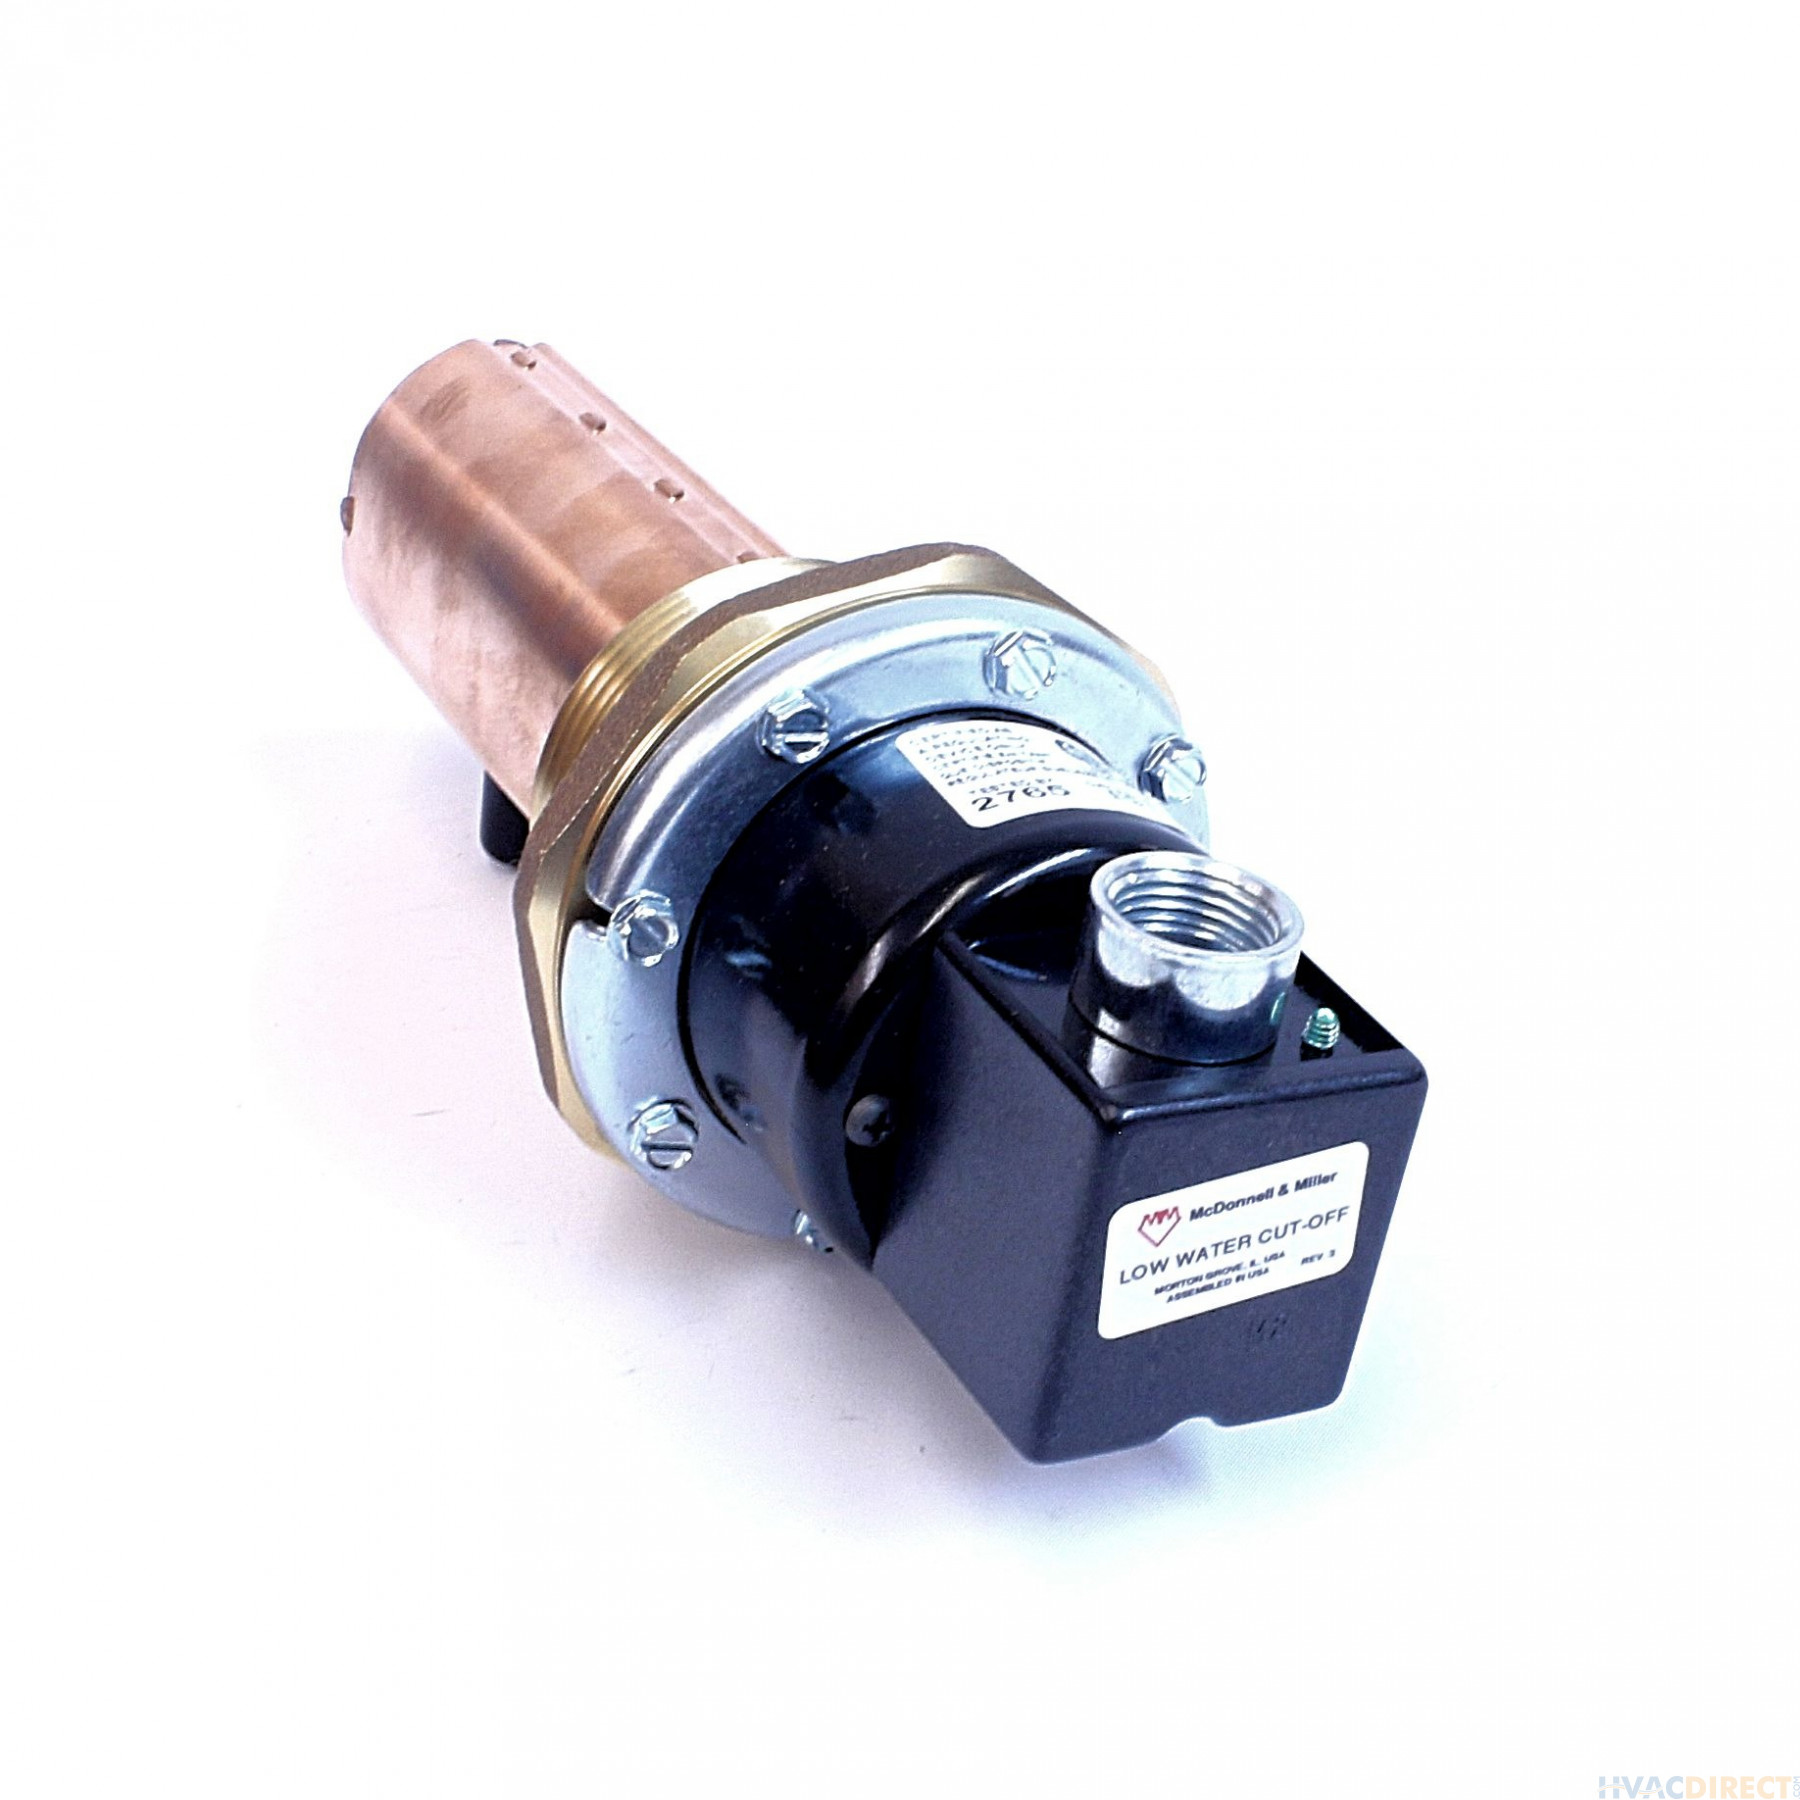 McDonnell & Miller Level Switch Series 69